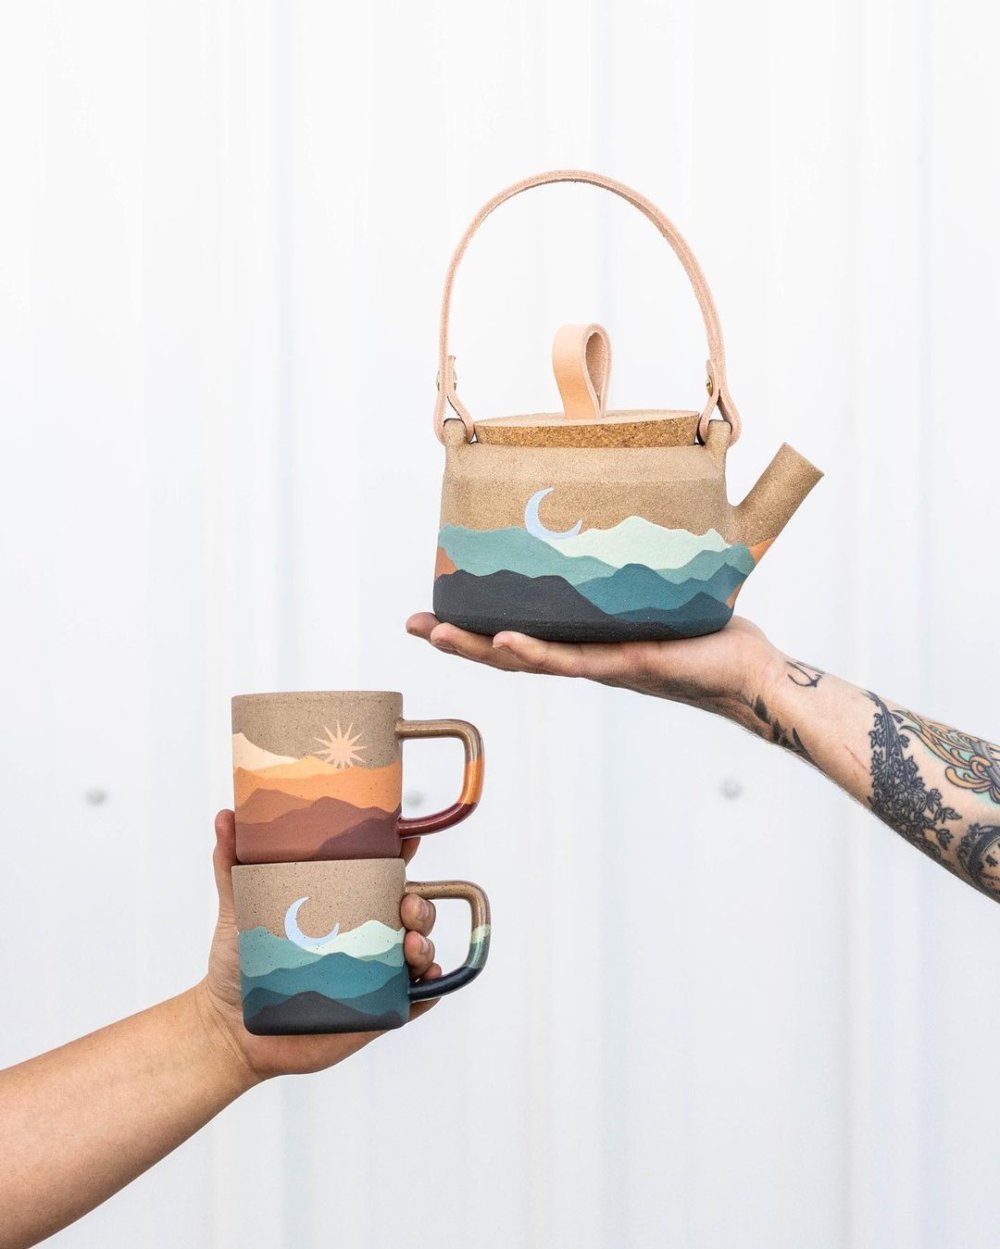 Gorgeous Handmade Ceramic Mugs Kettle And Bowls That Illustrate Magical Landscapes By Callahan Ceramics 9